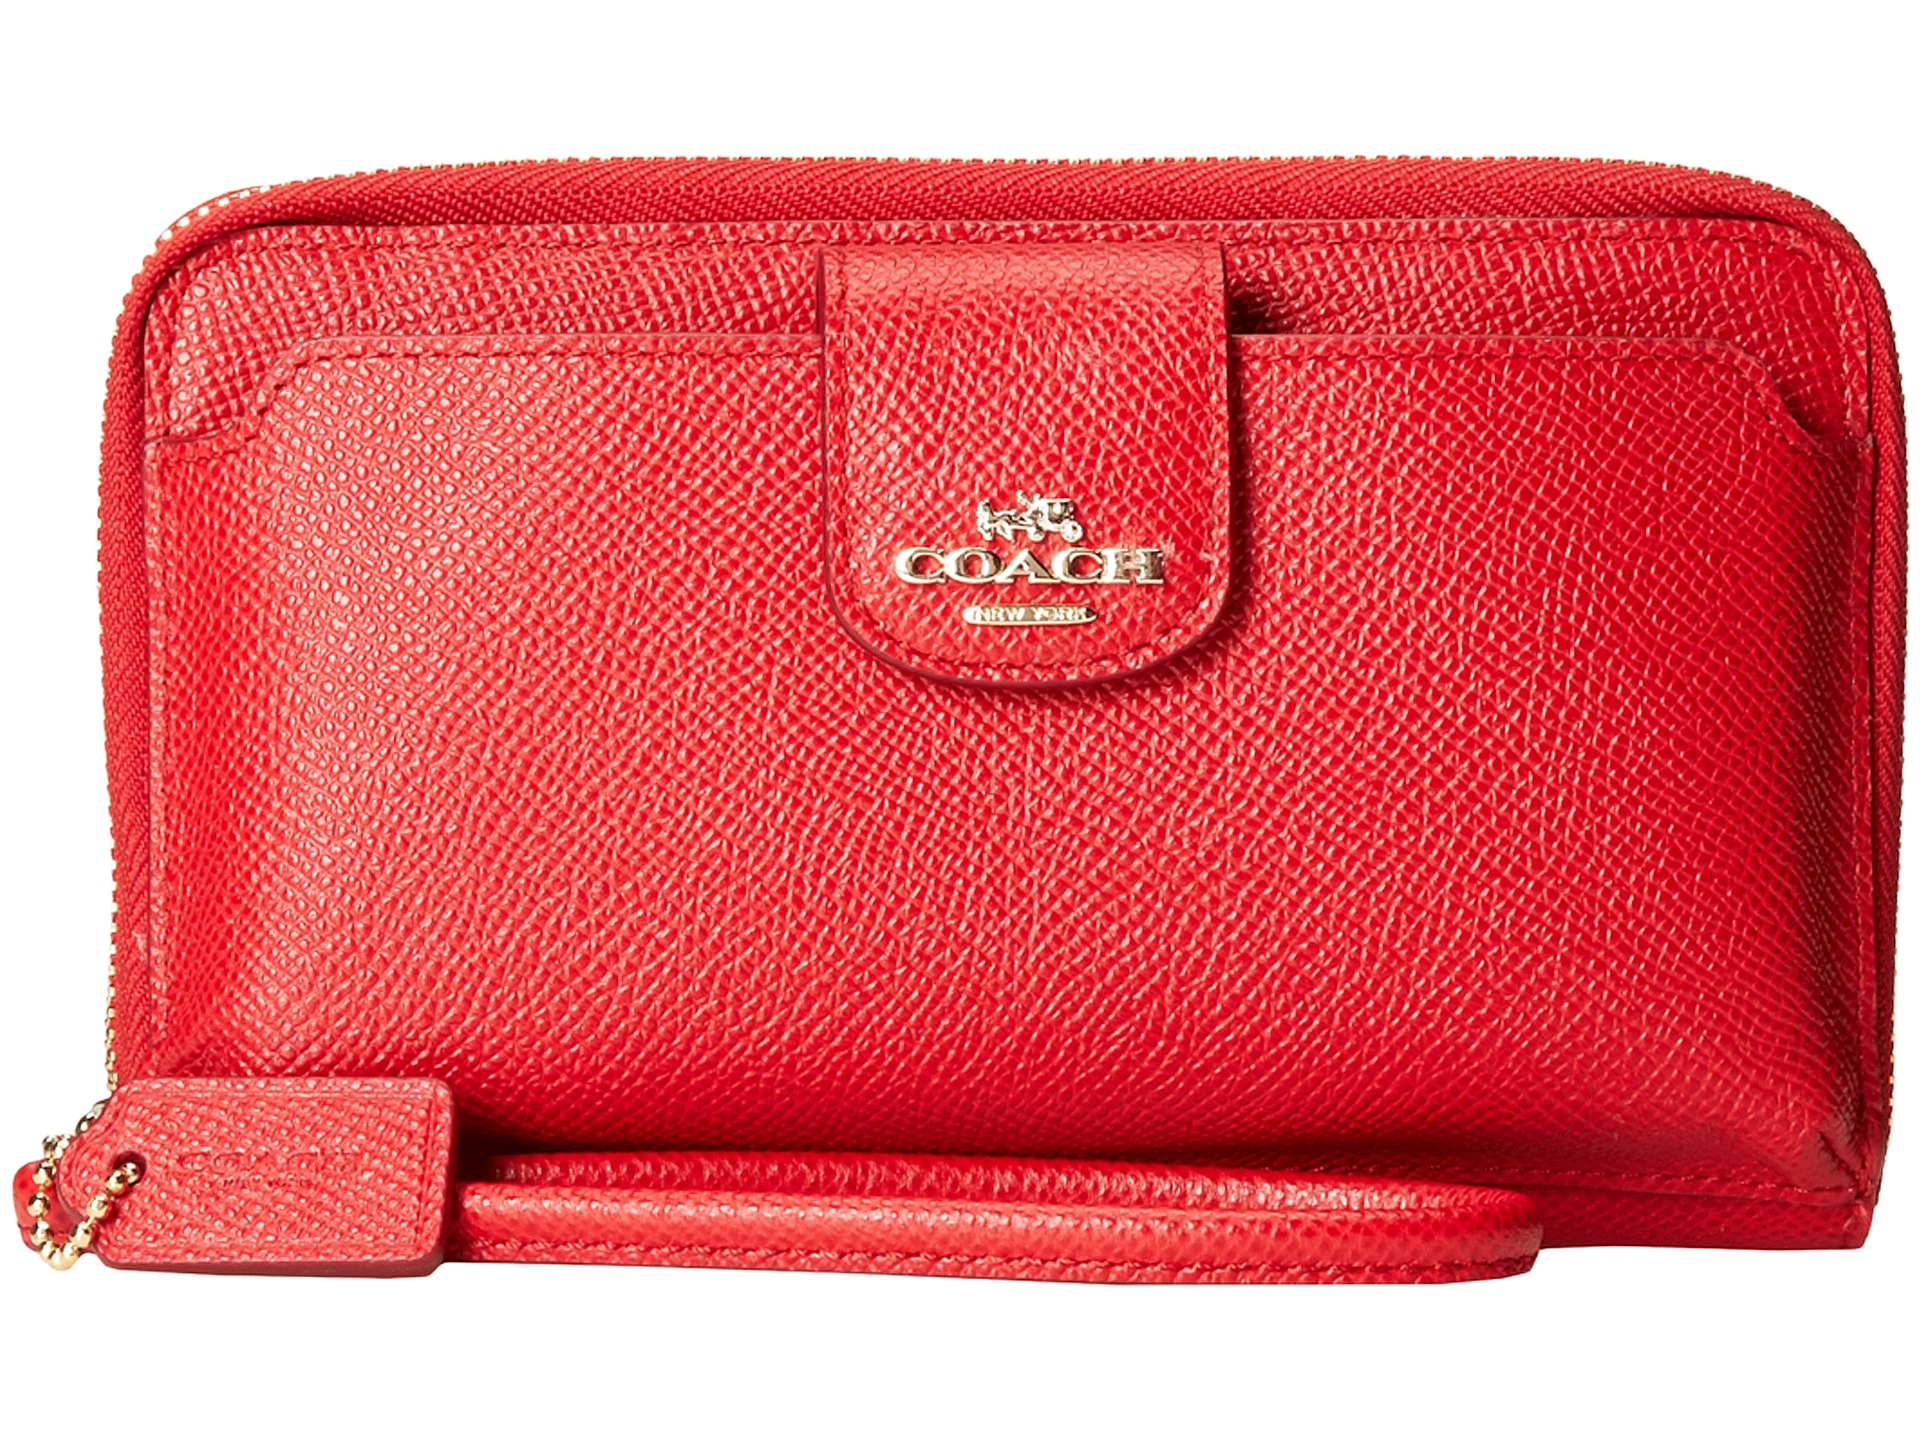 Coach Box Program Leather Pocket Universal Wallet Light Red | Shipped ...